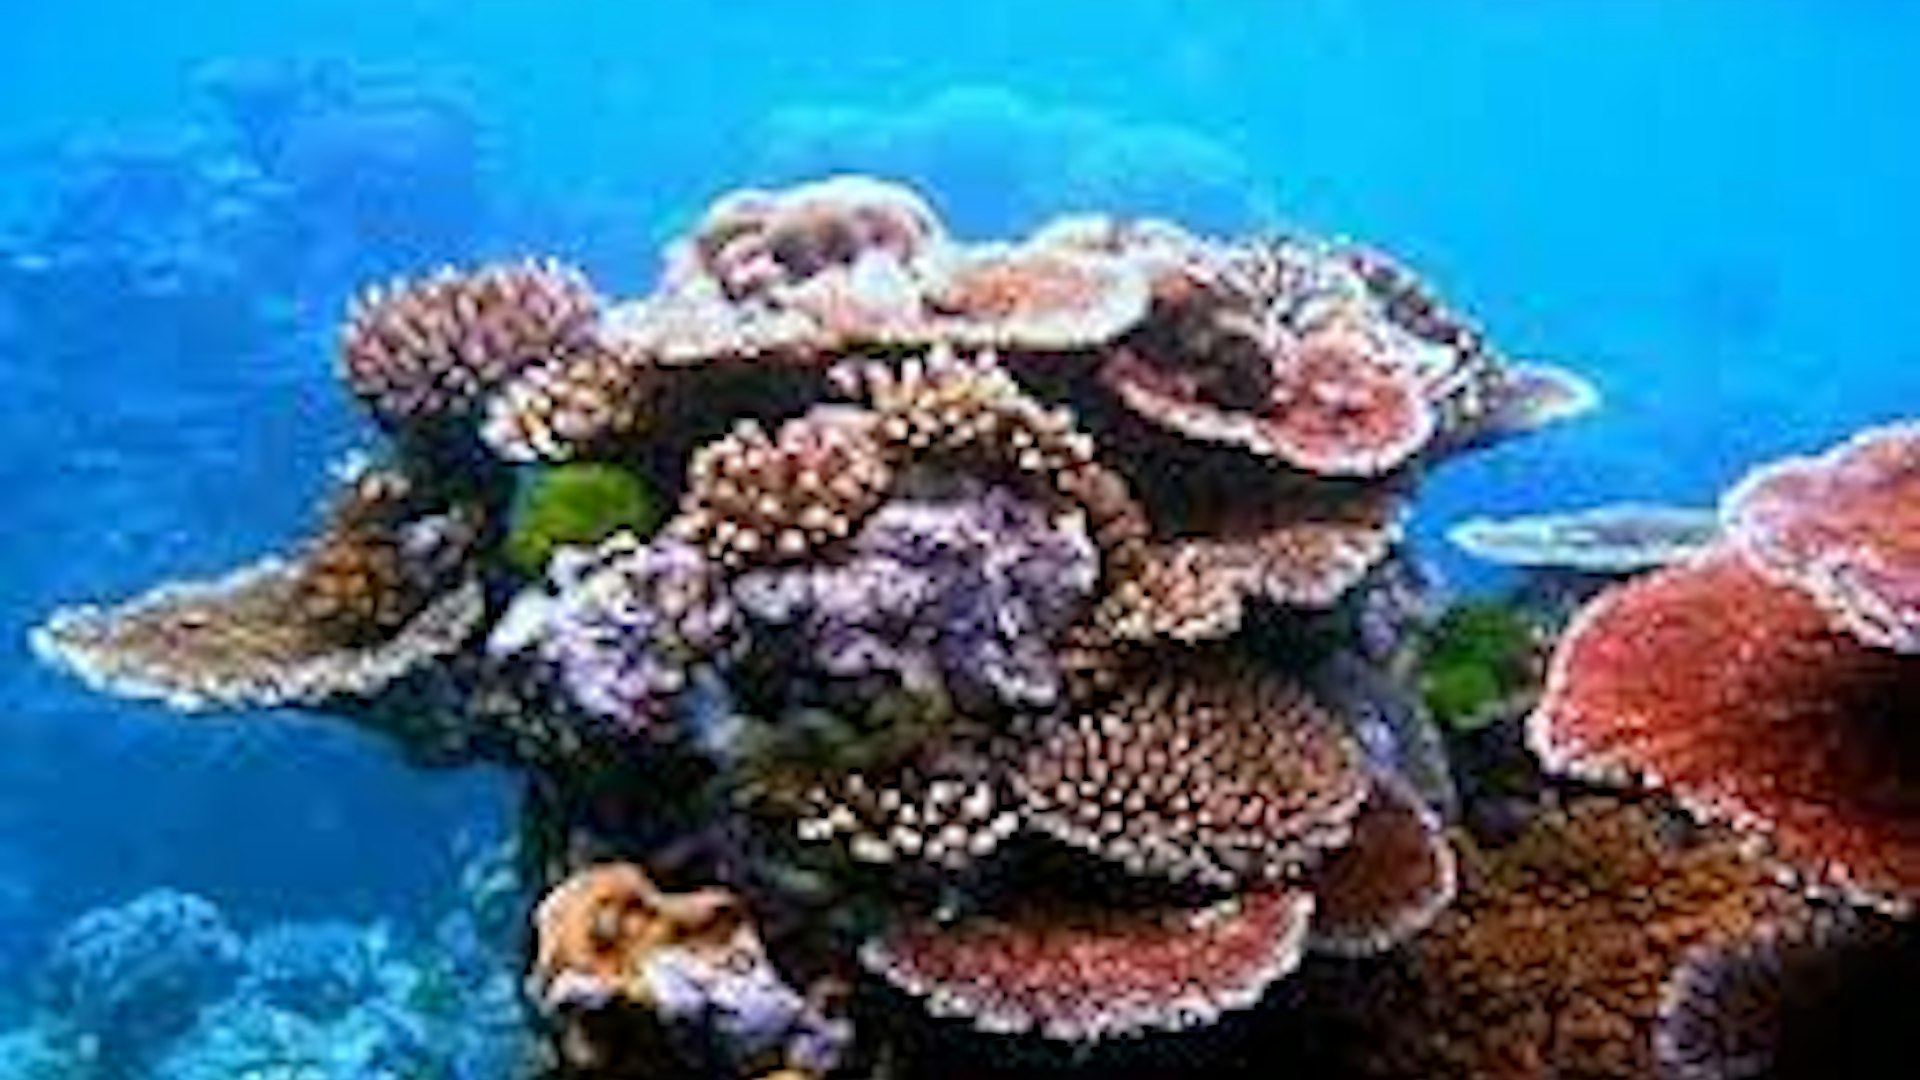 Why are corals called the rainforest of the ocean?